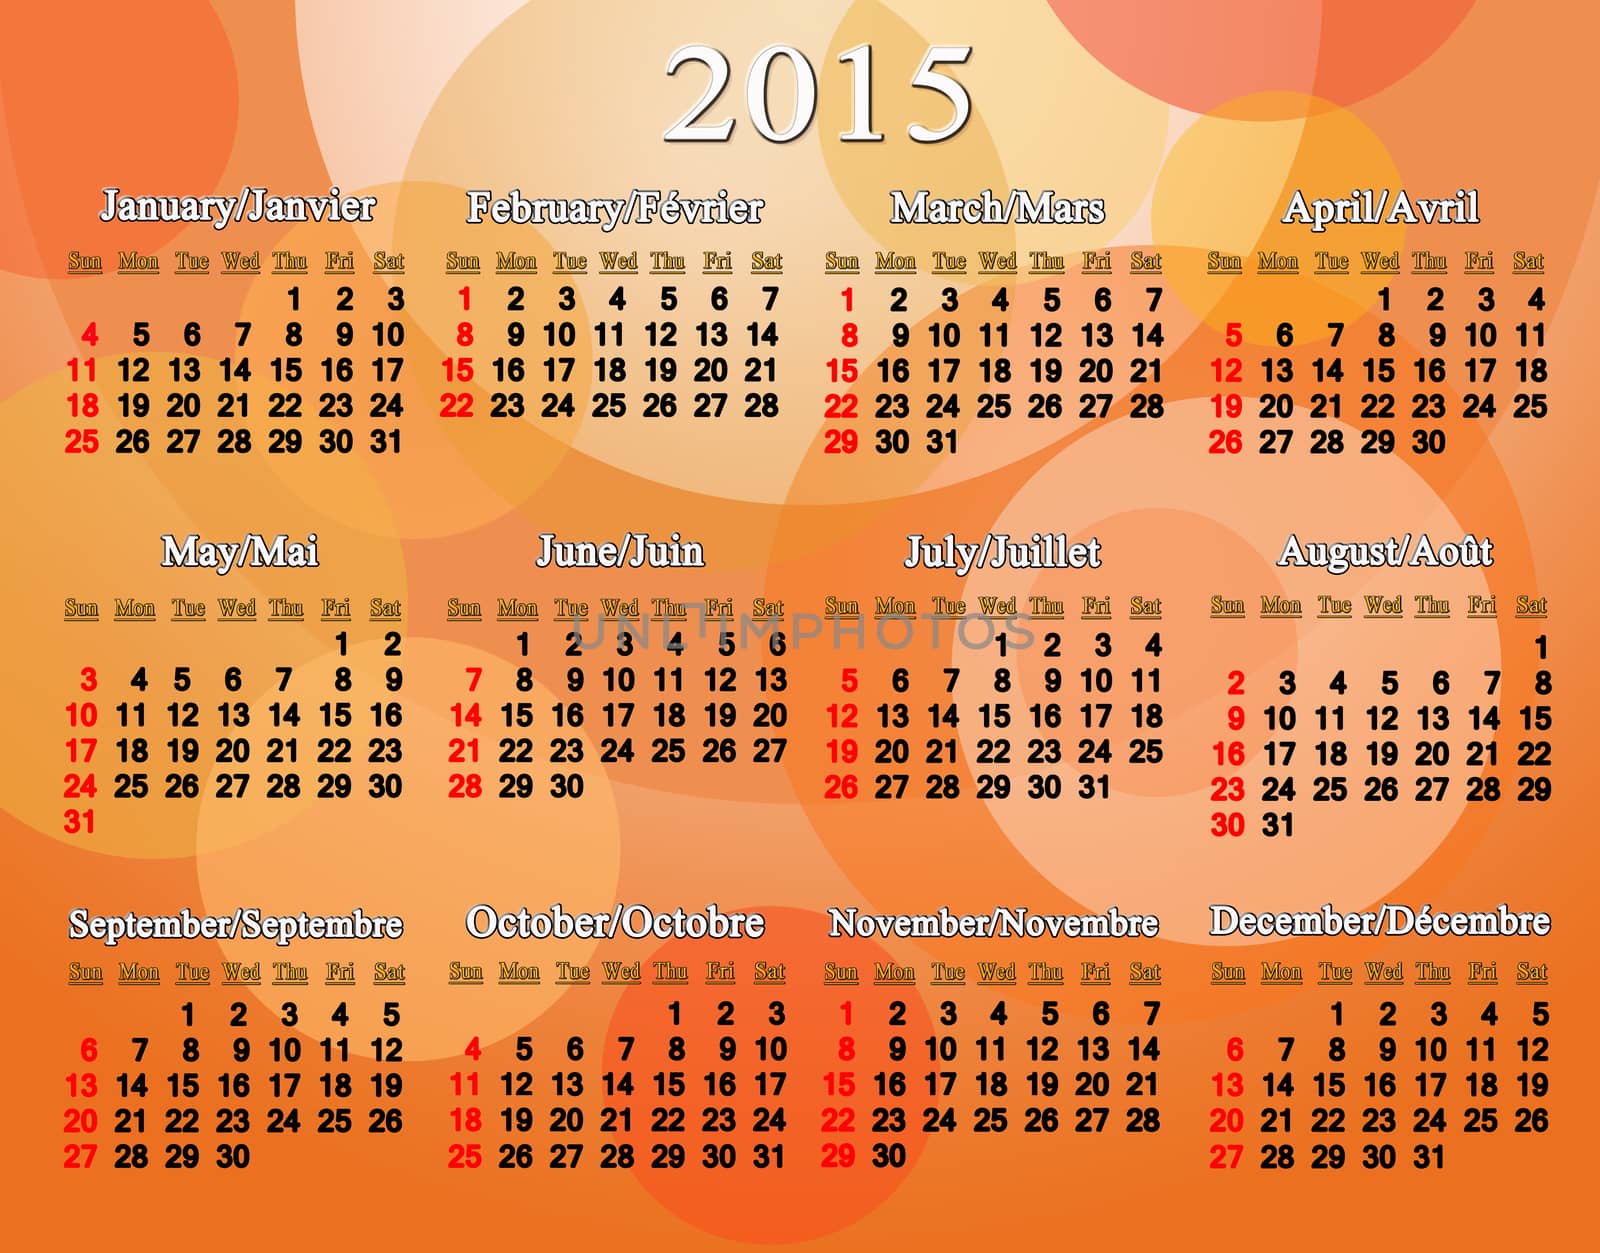 calendar for 2015 year in English and French on the orange by alexmak